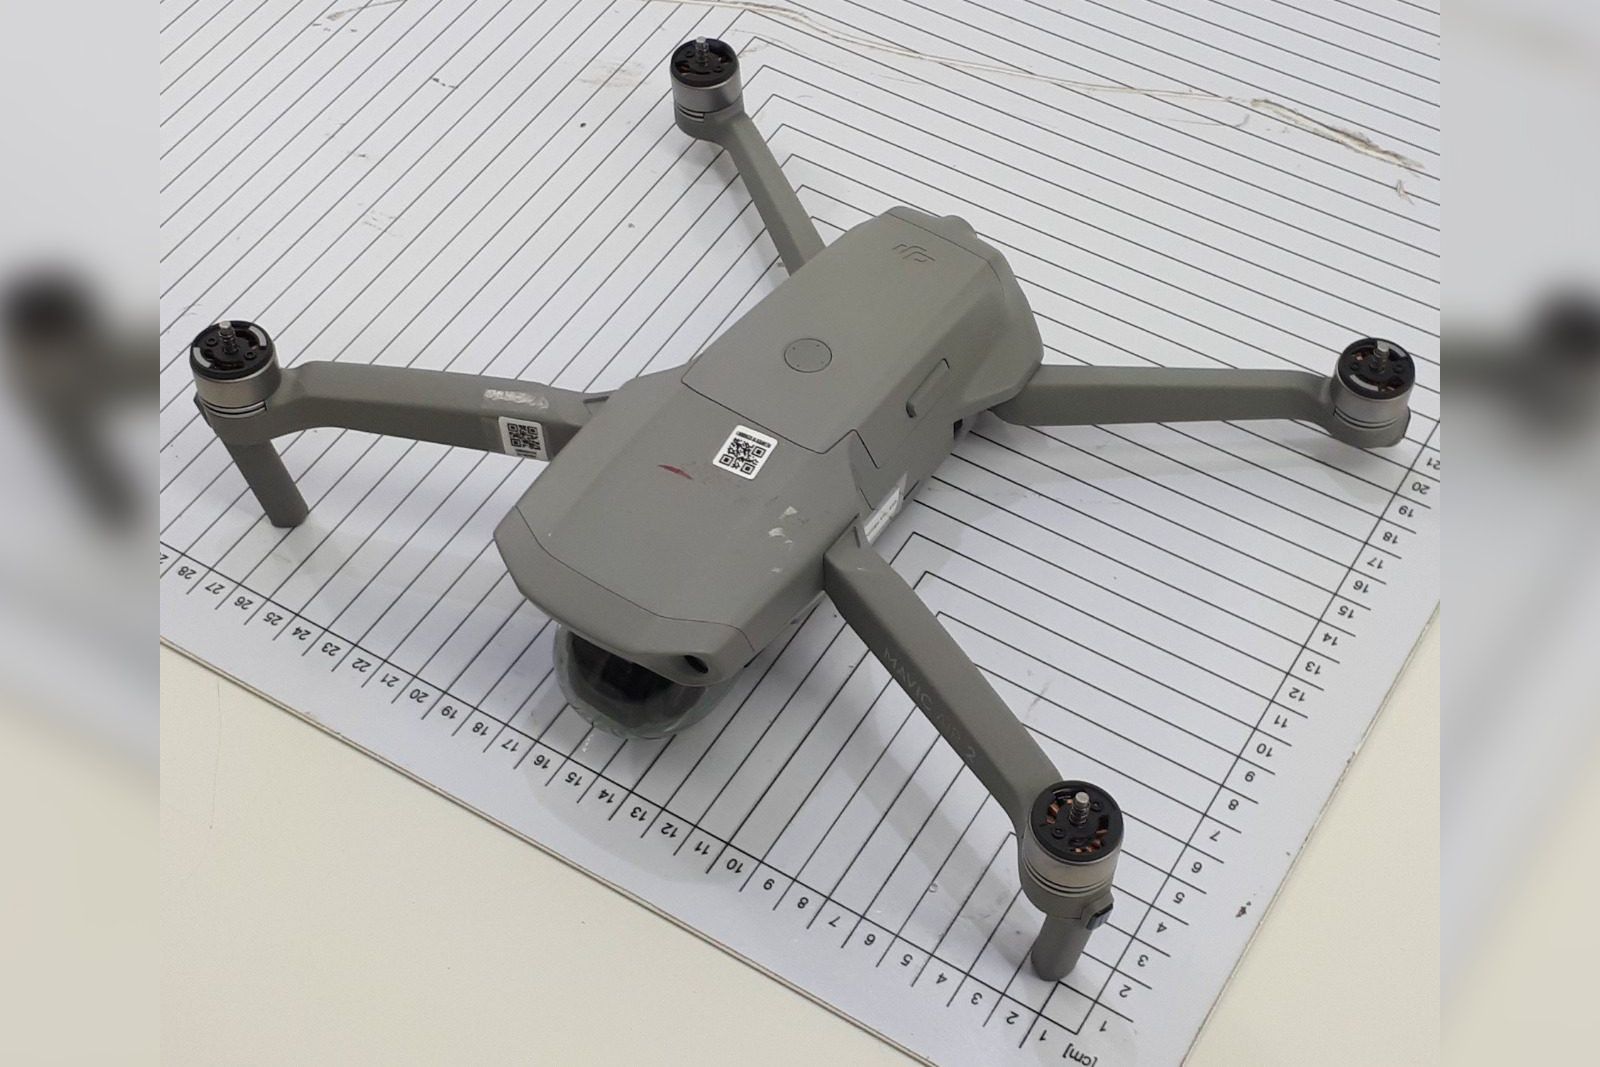 DJI Mavic Air 2 leaks drone to feature 48MP camera 34 minute flight time image 1